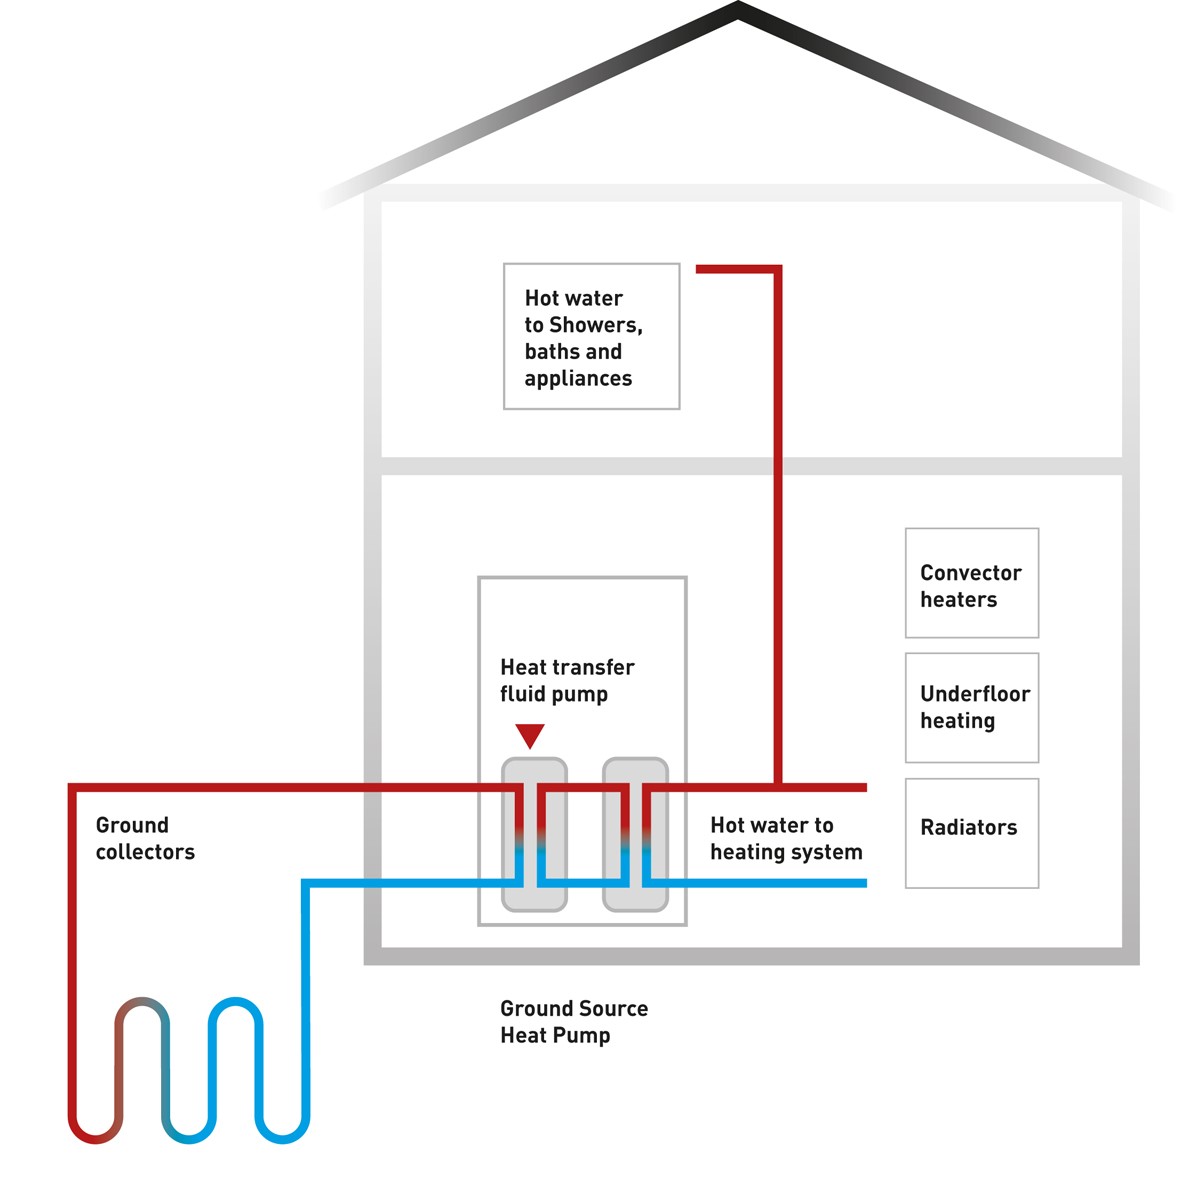 A diagram showing how a ground source heat pump works